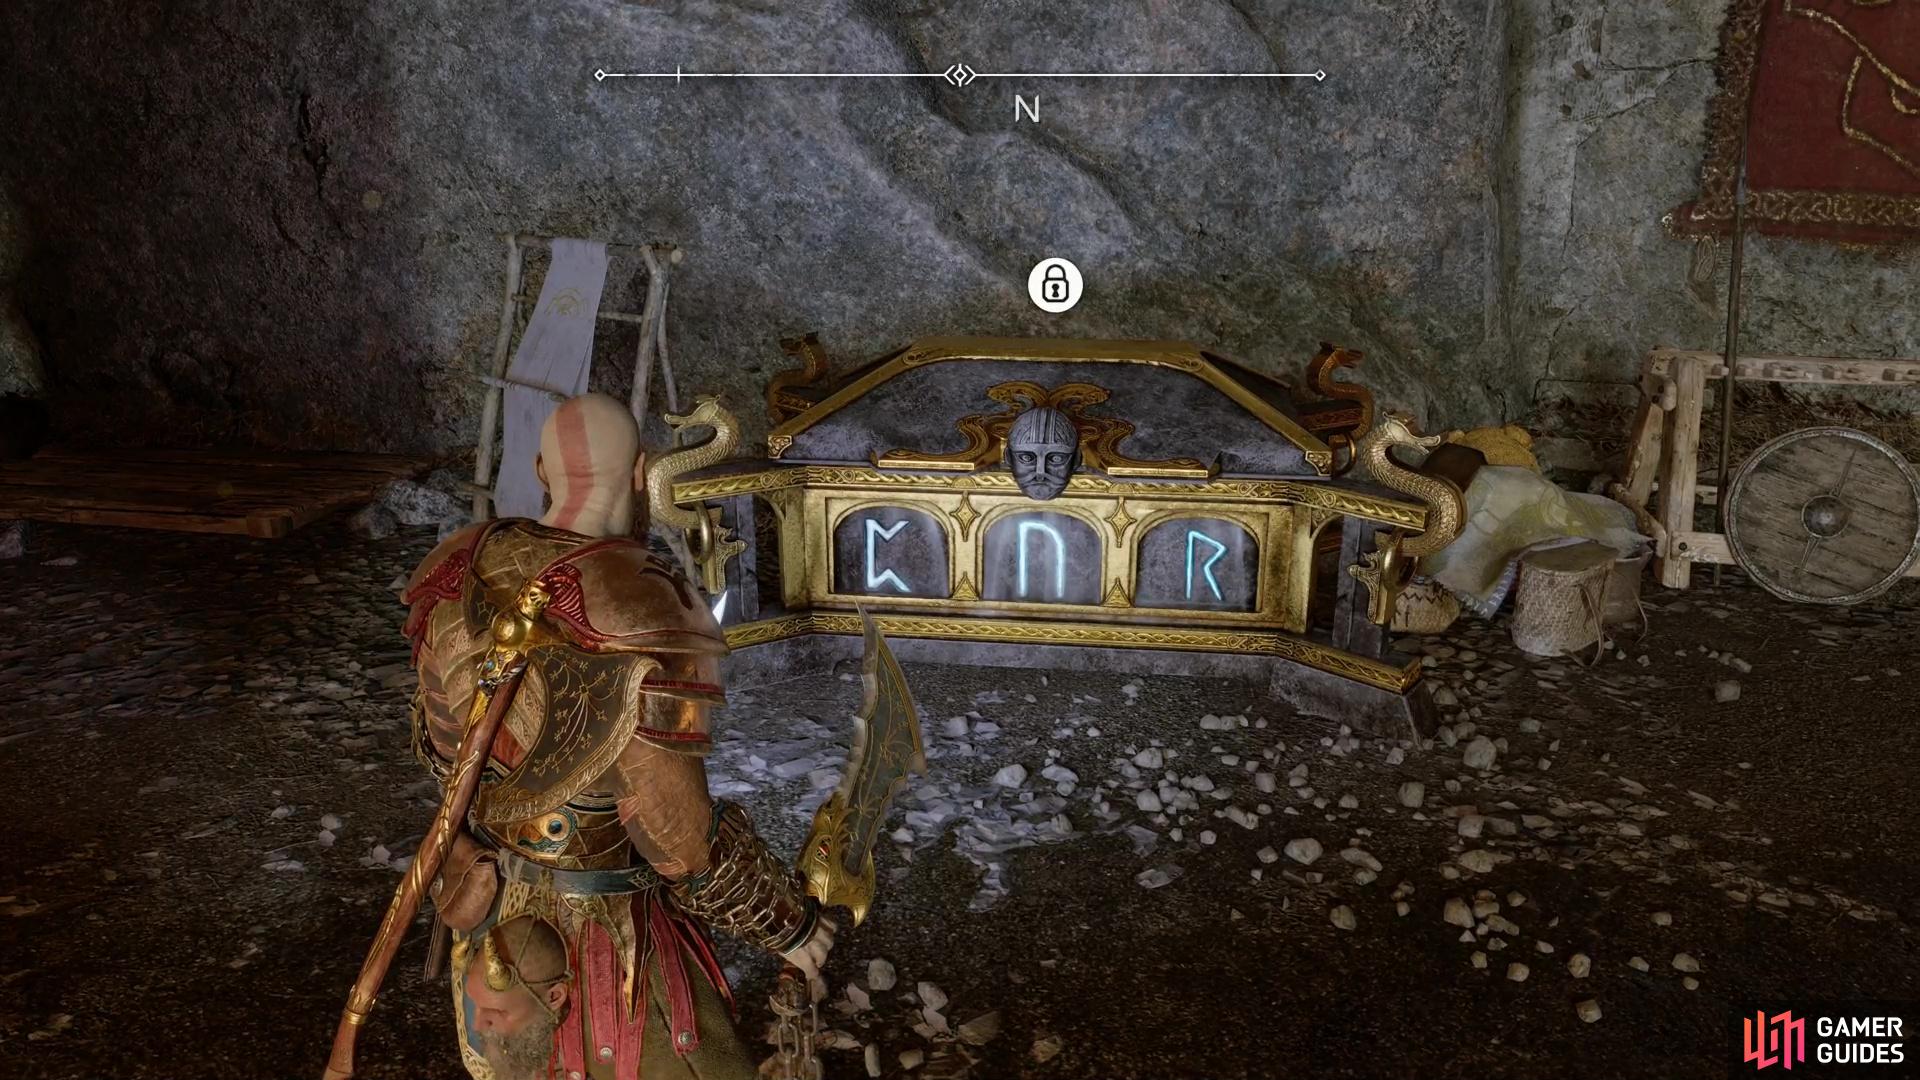 Find a Nornir Chest on a ledge in the Raider Hideout. You’ll need to light three rune braziers to open it.